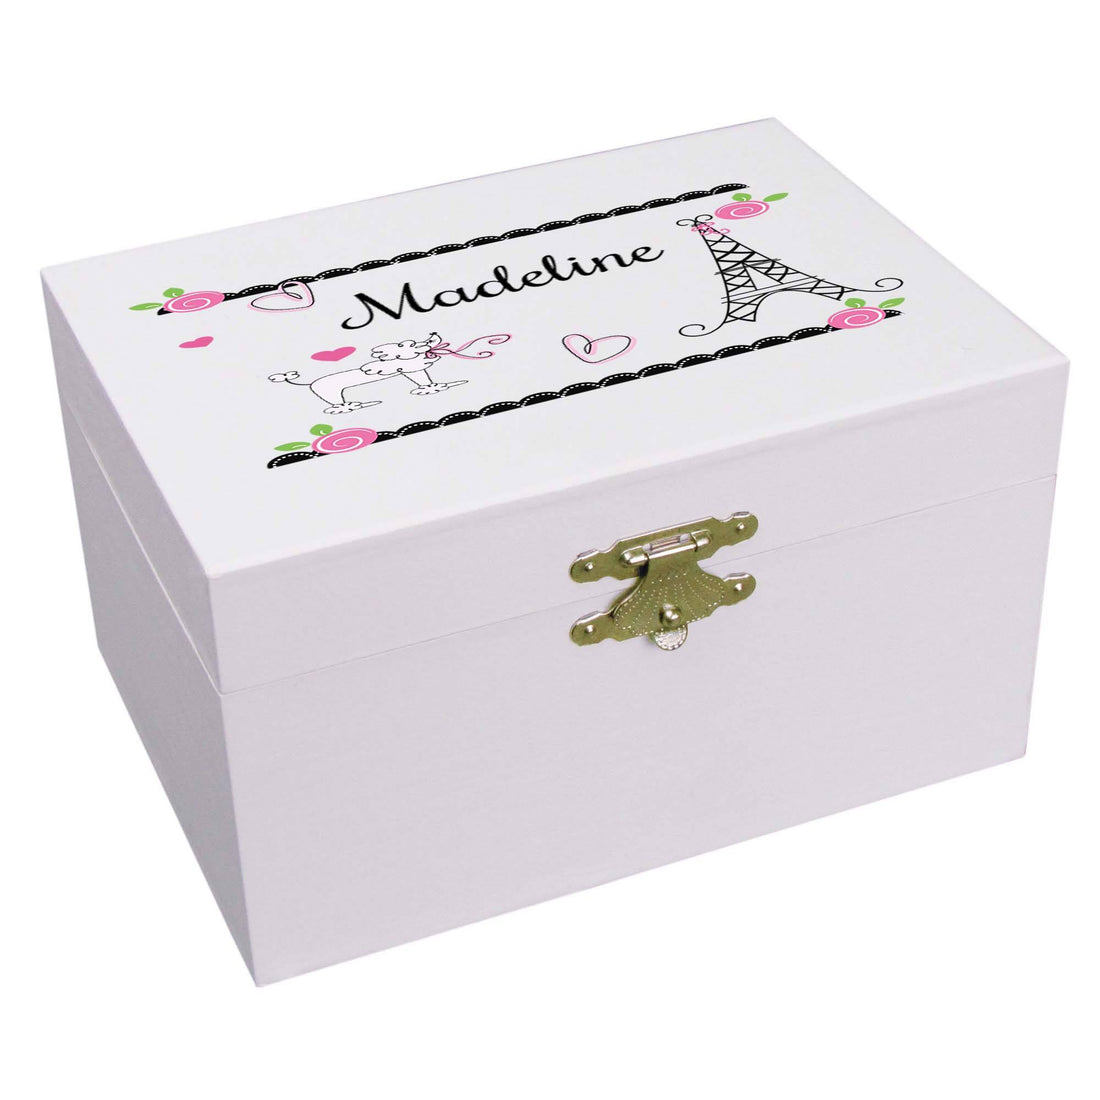 Personalized Ballerina Jewelry Box with French Paris design